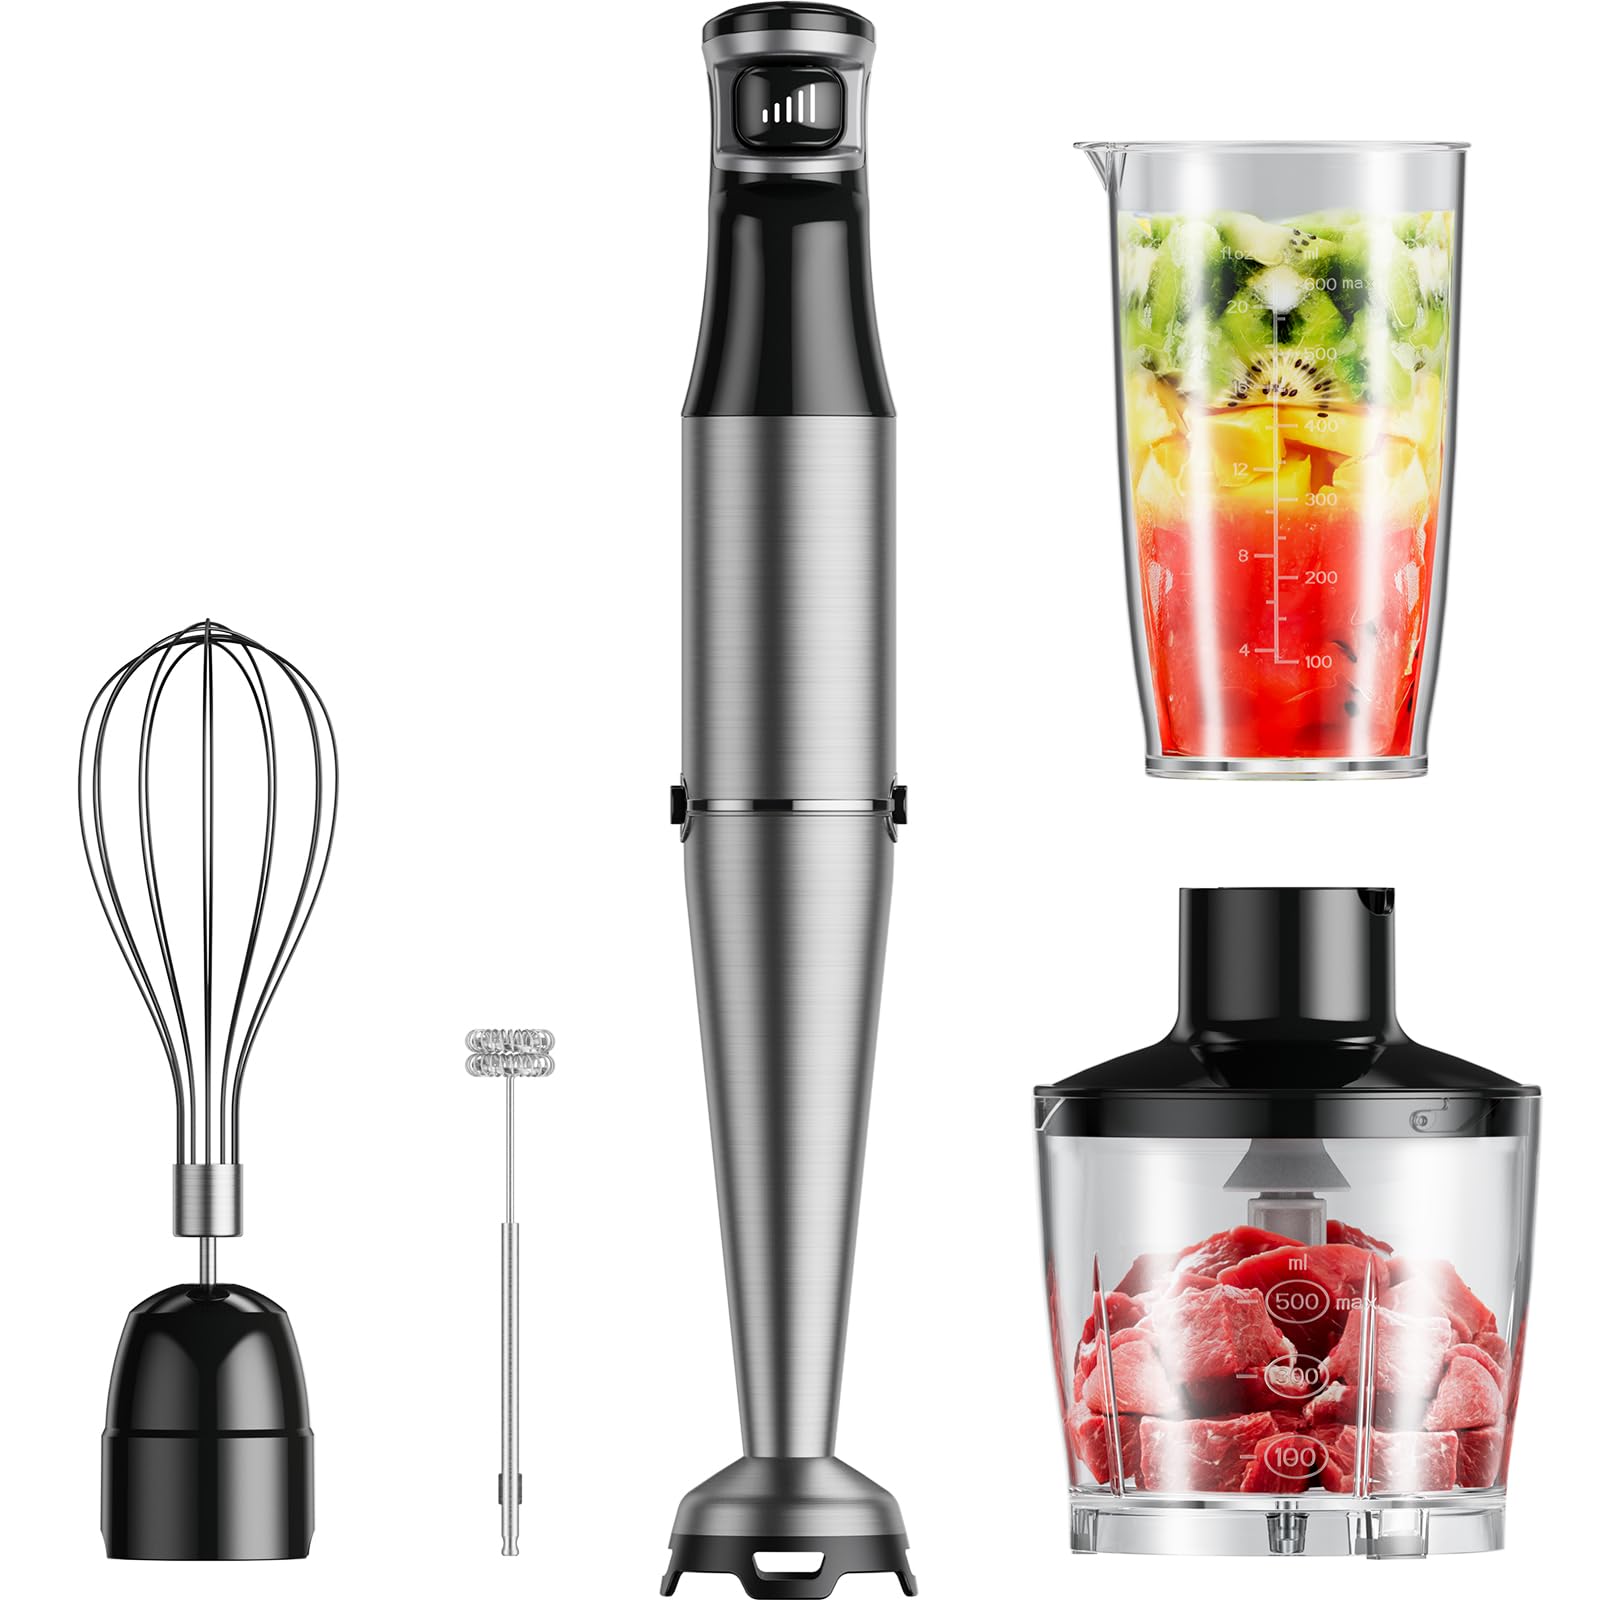 Immersion Hand Blender 5 in 1: 1100W Electric Blender Handheld Stick Mixer with Trigger Control Grip, Emulsion Blenders for Kitchen Soup, Mayo, Smoothie and Baby Food with Chopper, Whisk and Frother